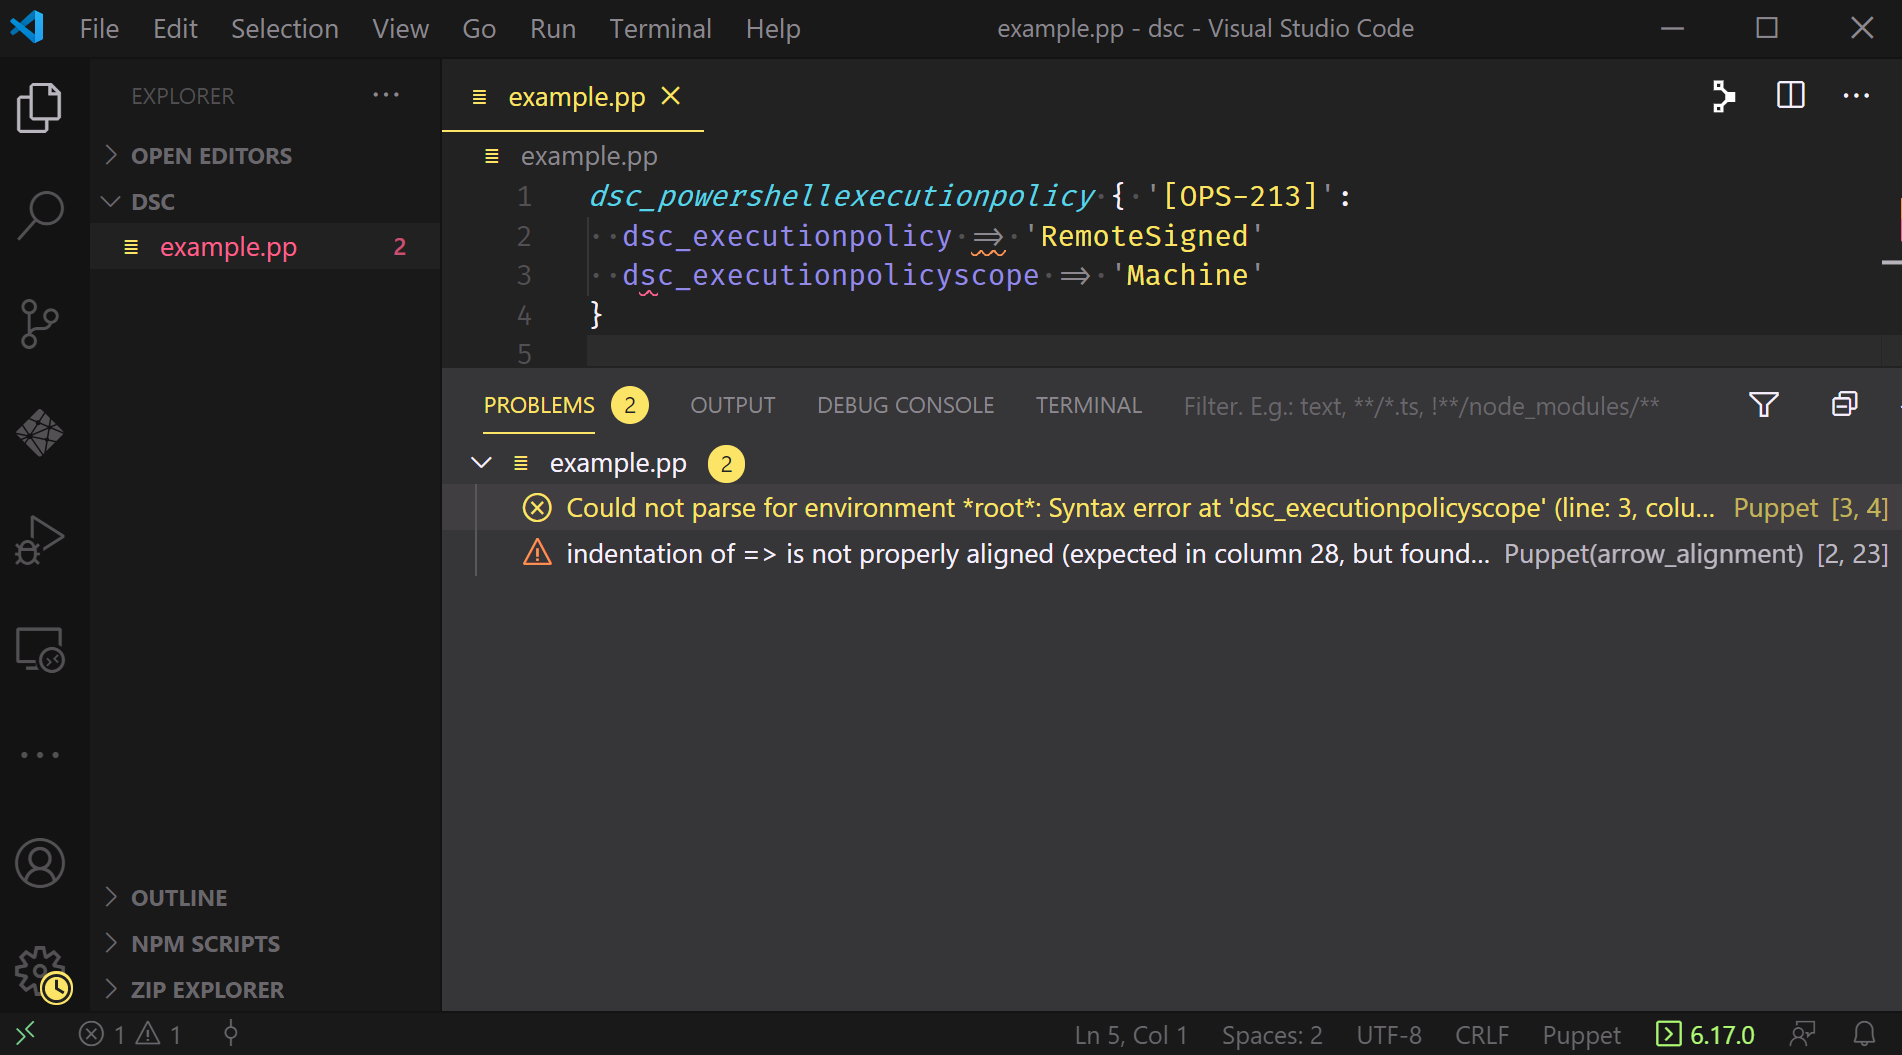 A VSCode window displaying the Problems Pane with two entries